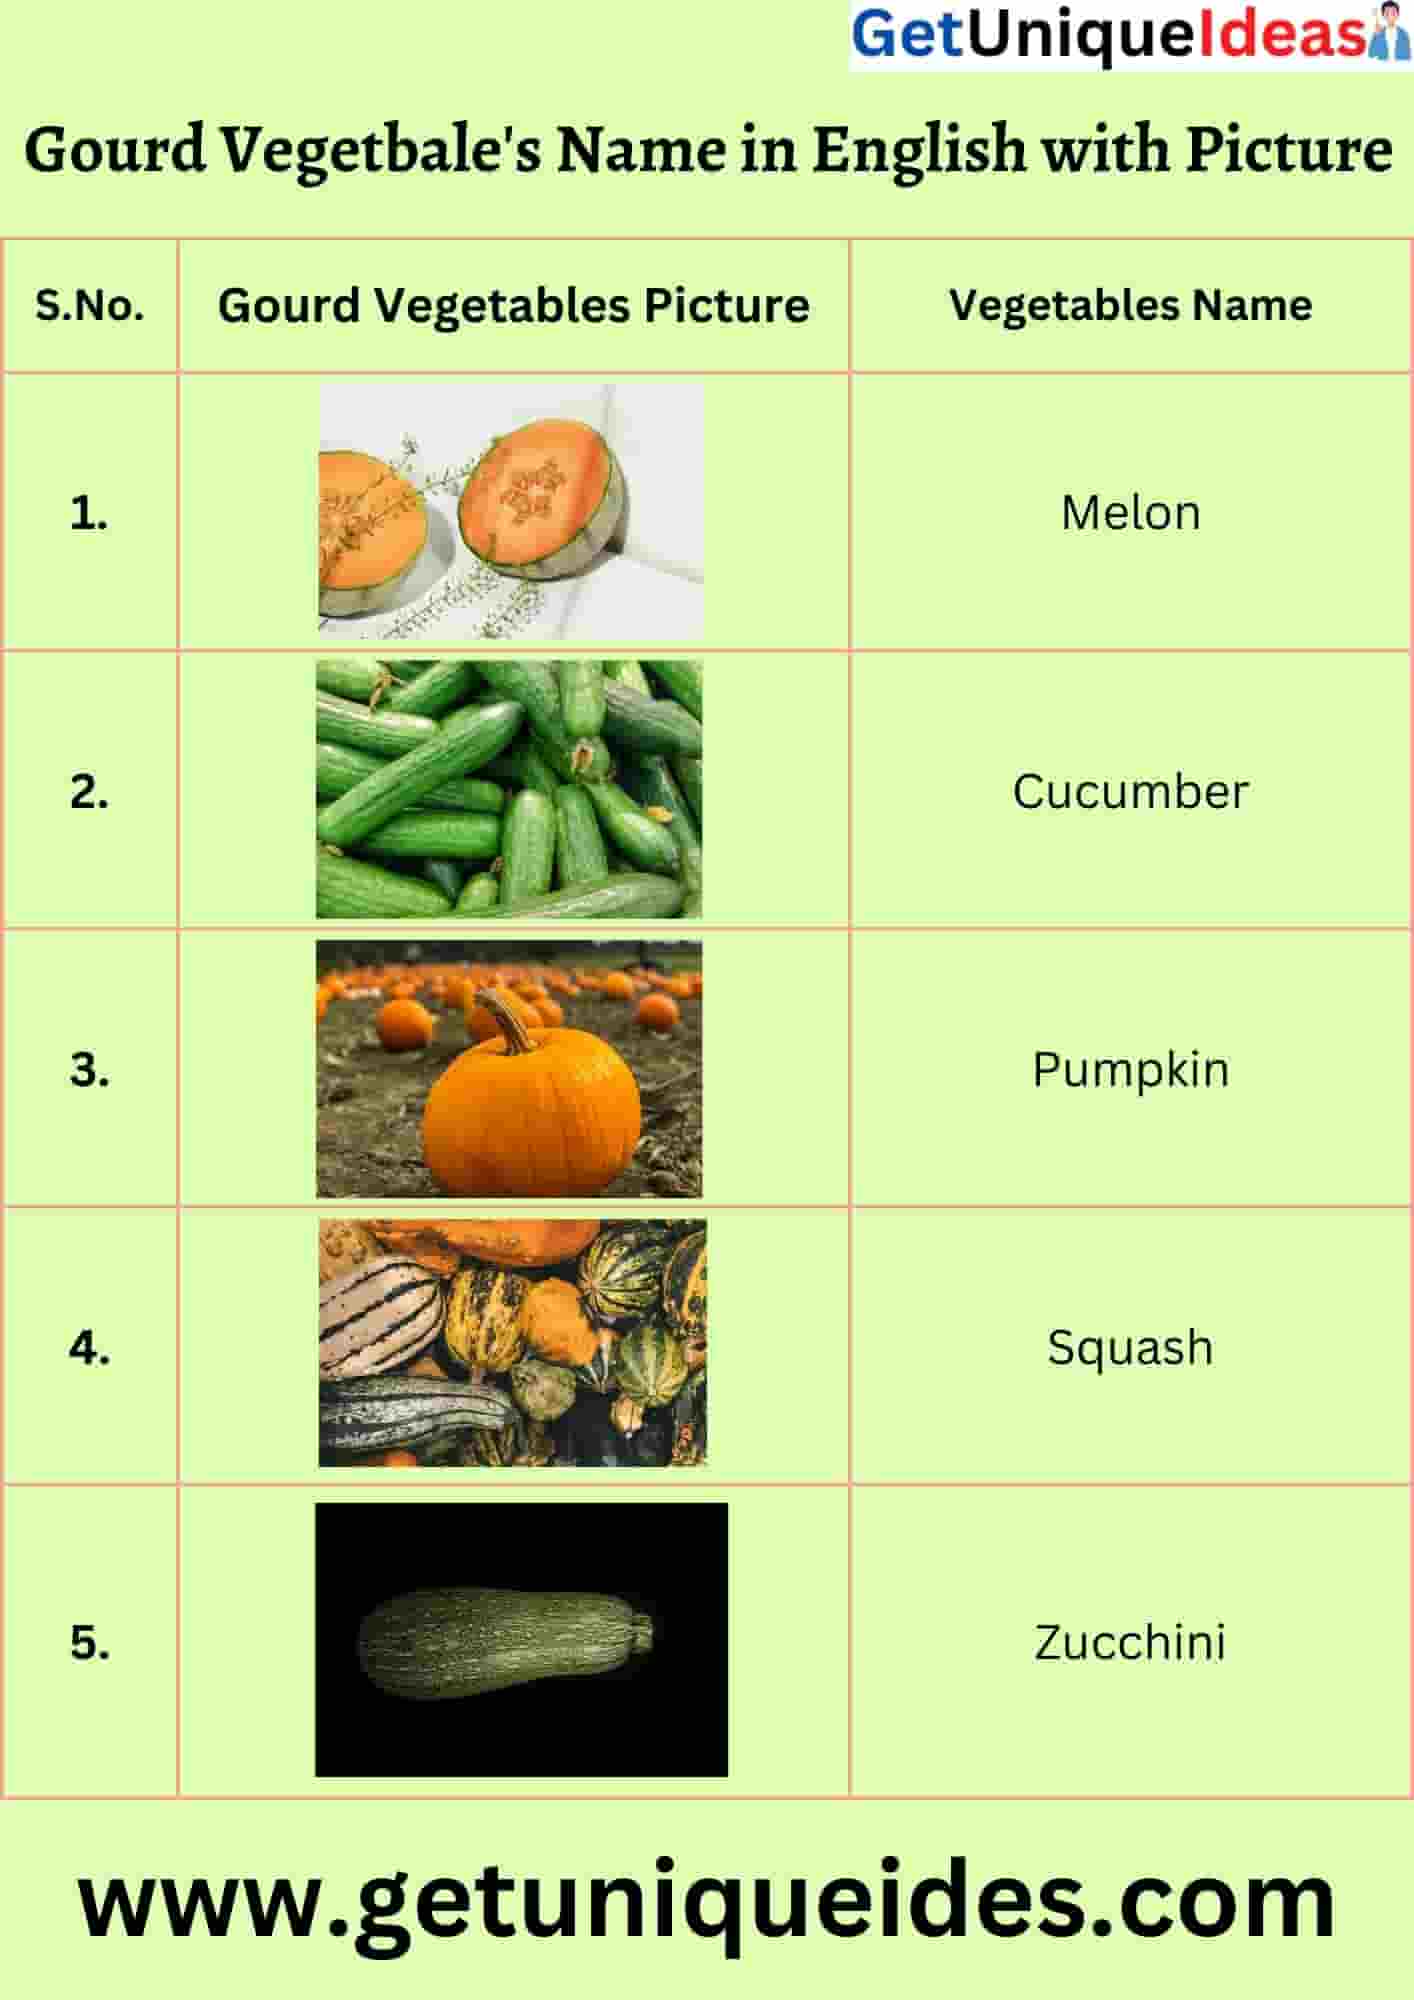 Gourd Vegetable's Name in English with Picture